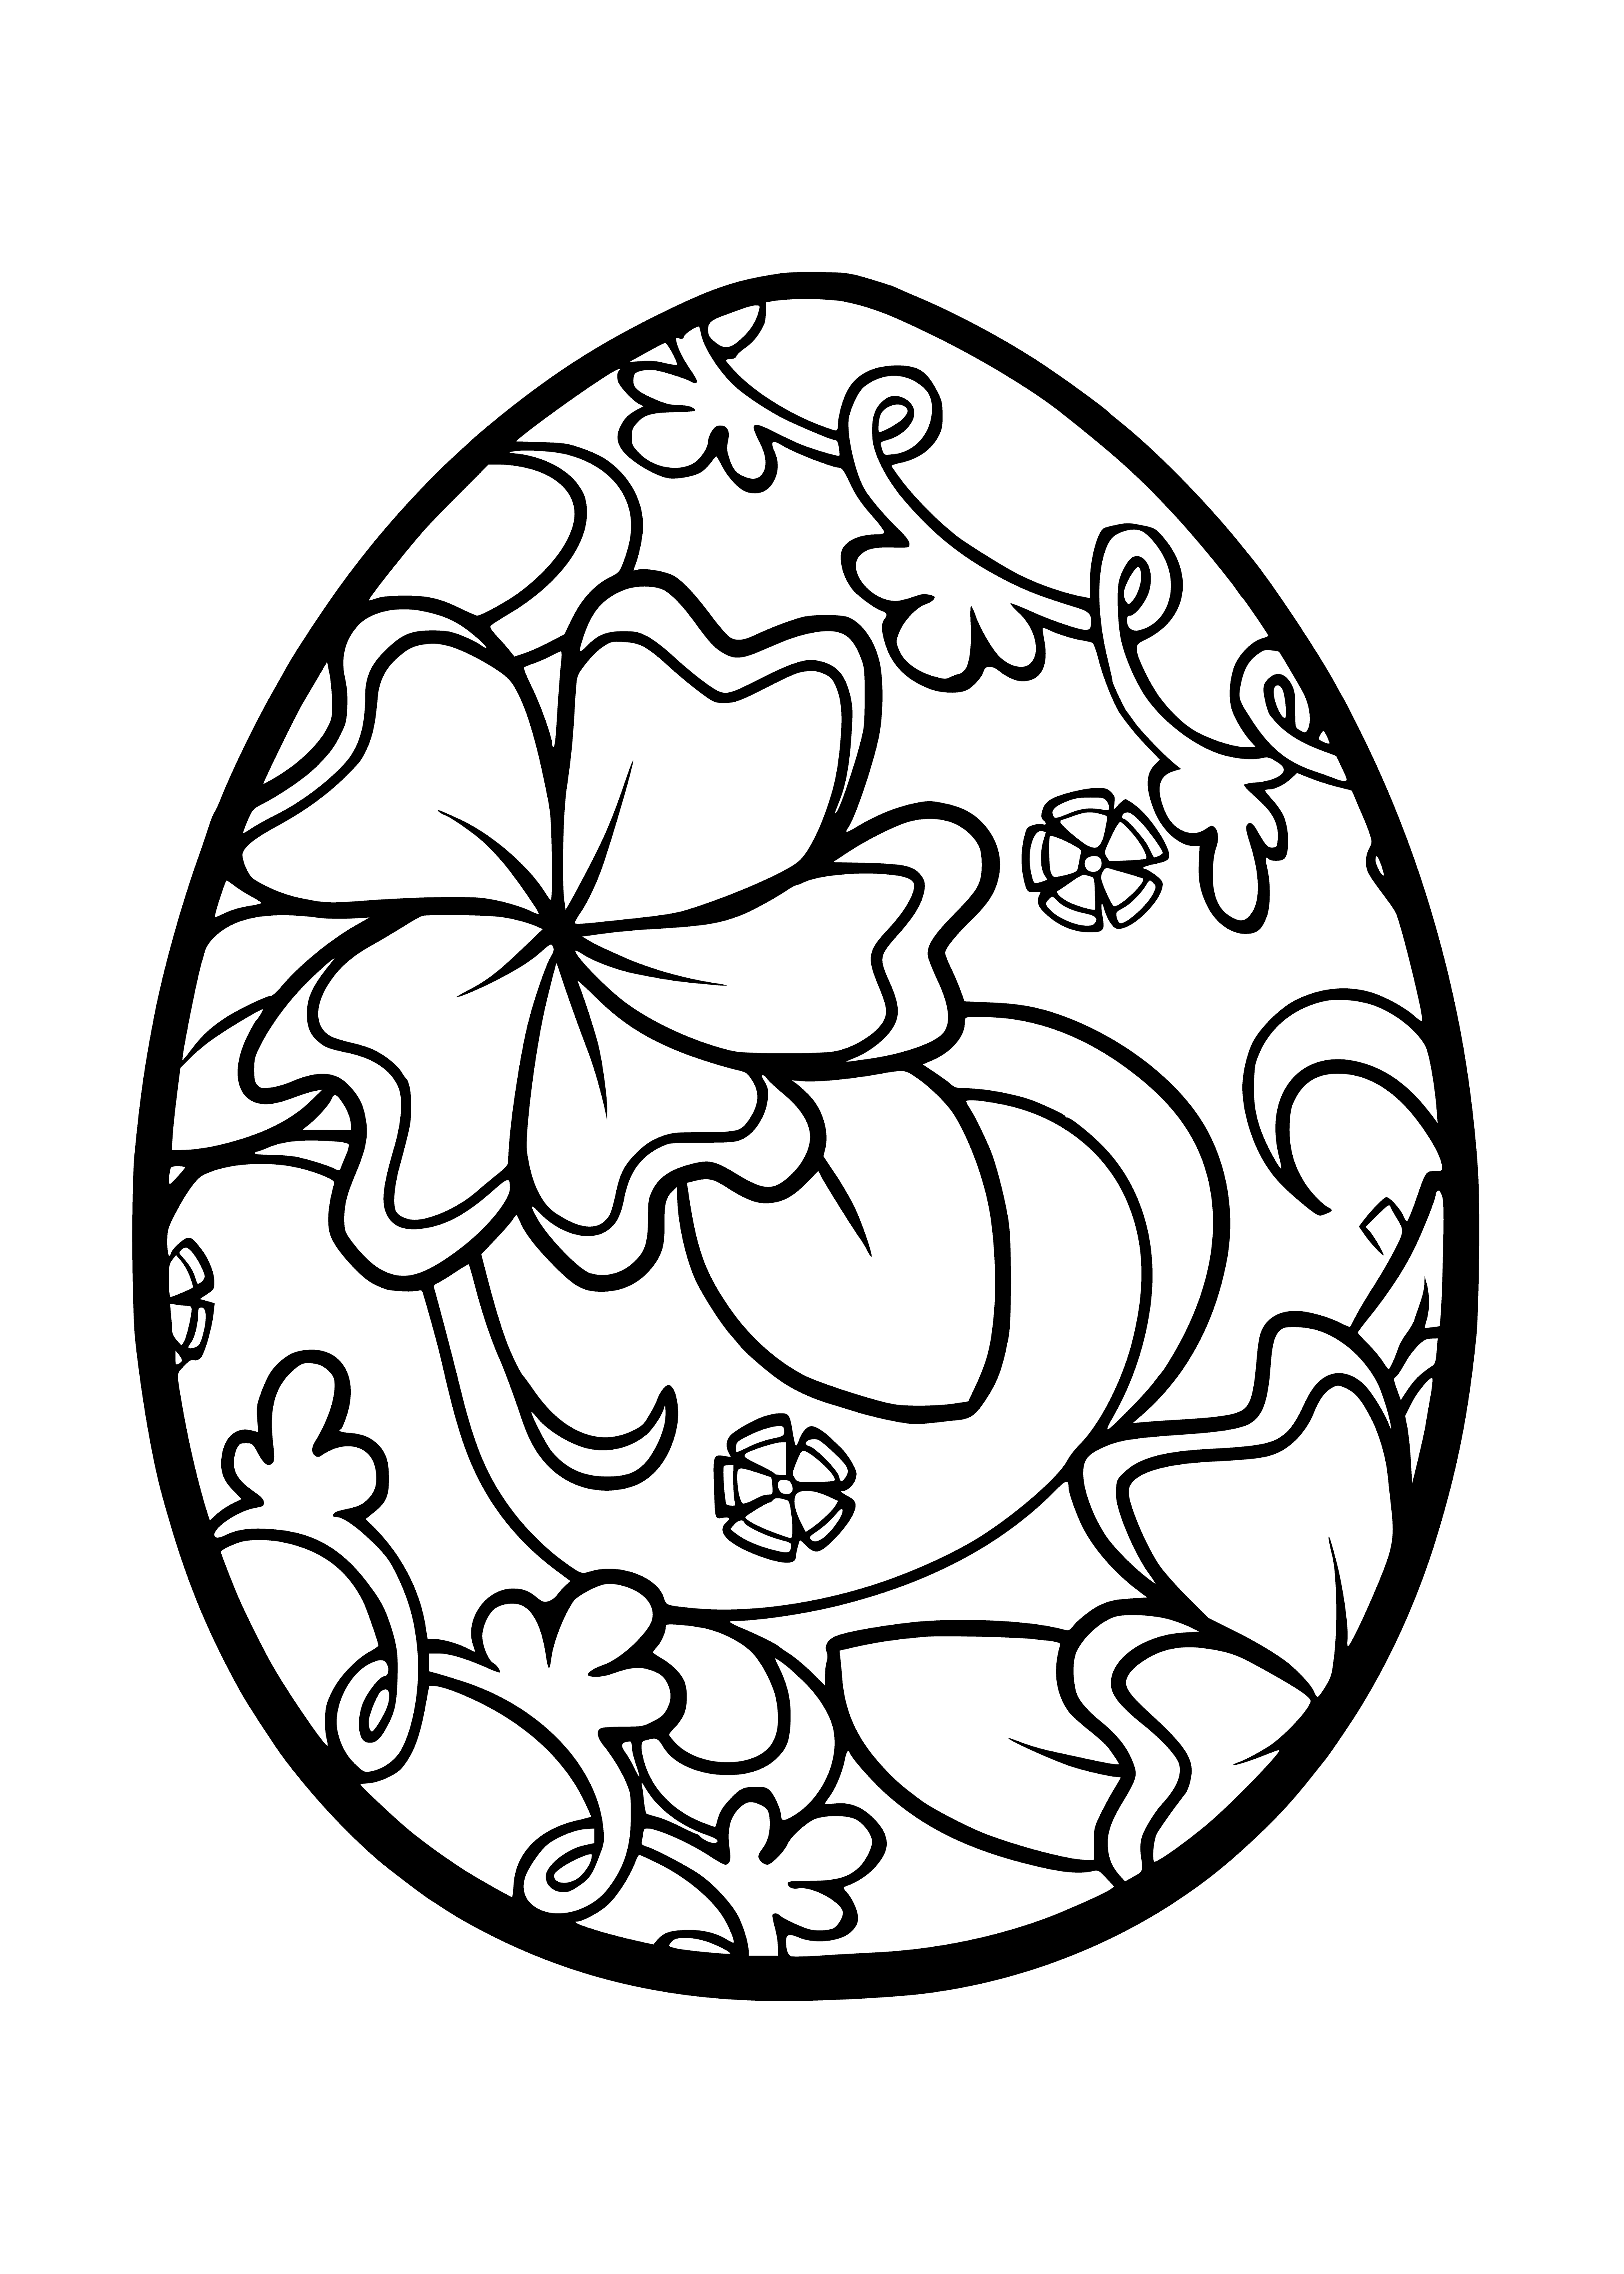 coloring page: 7 eggs: 3 blue, 2 green, 1 pink & yellow each with stripes & polka dots.